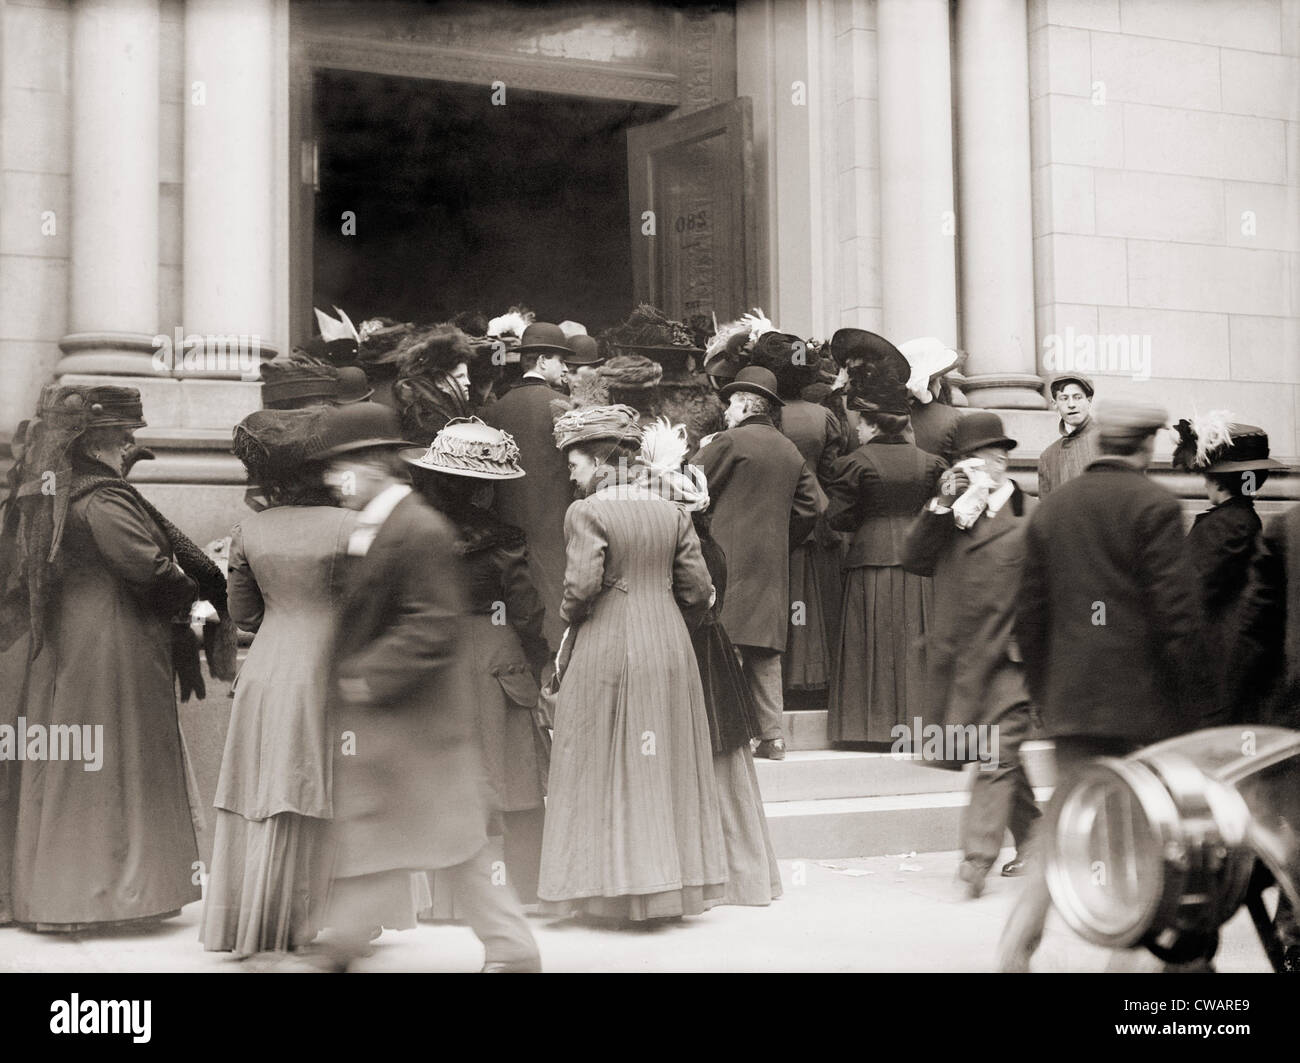 A run on a New York savings bank on January 9, 1911.  20th century banking reforms, the Federal Reserve Act of 1913 and Banking Stock Photo